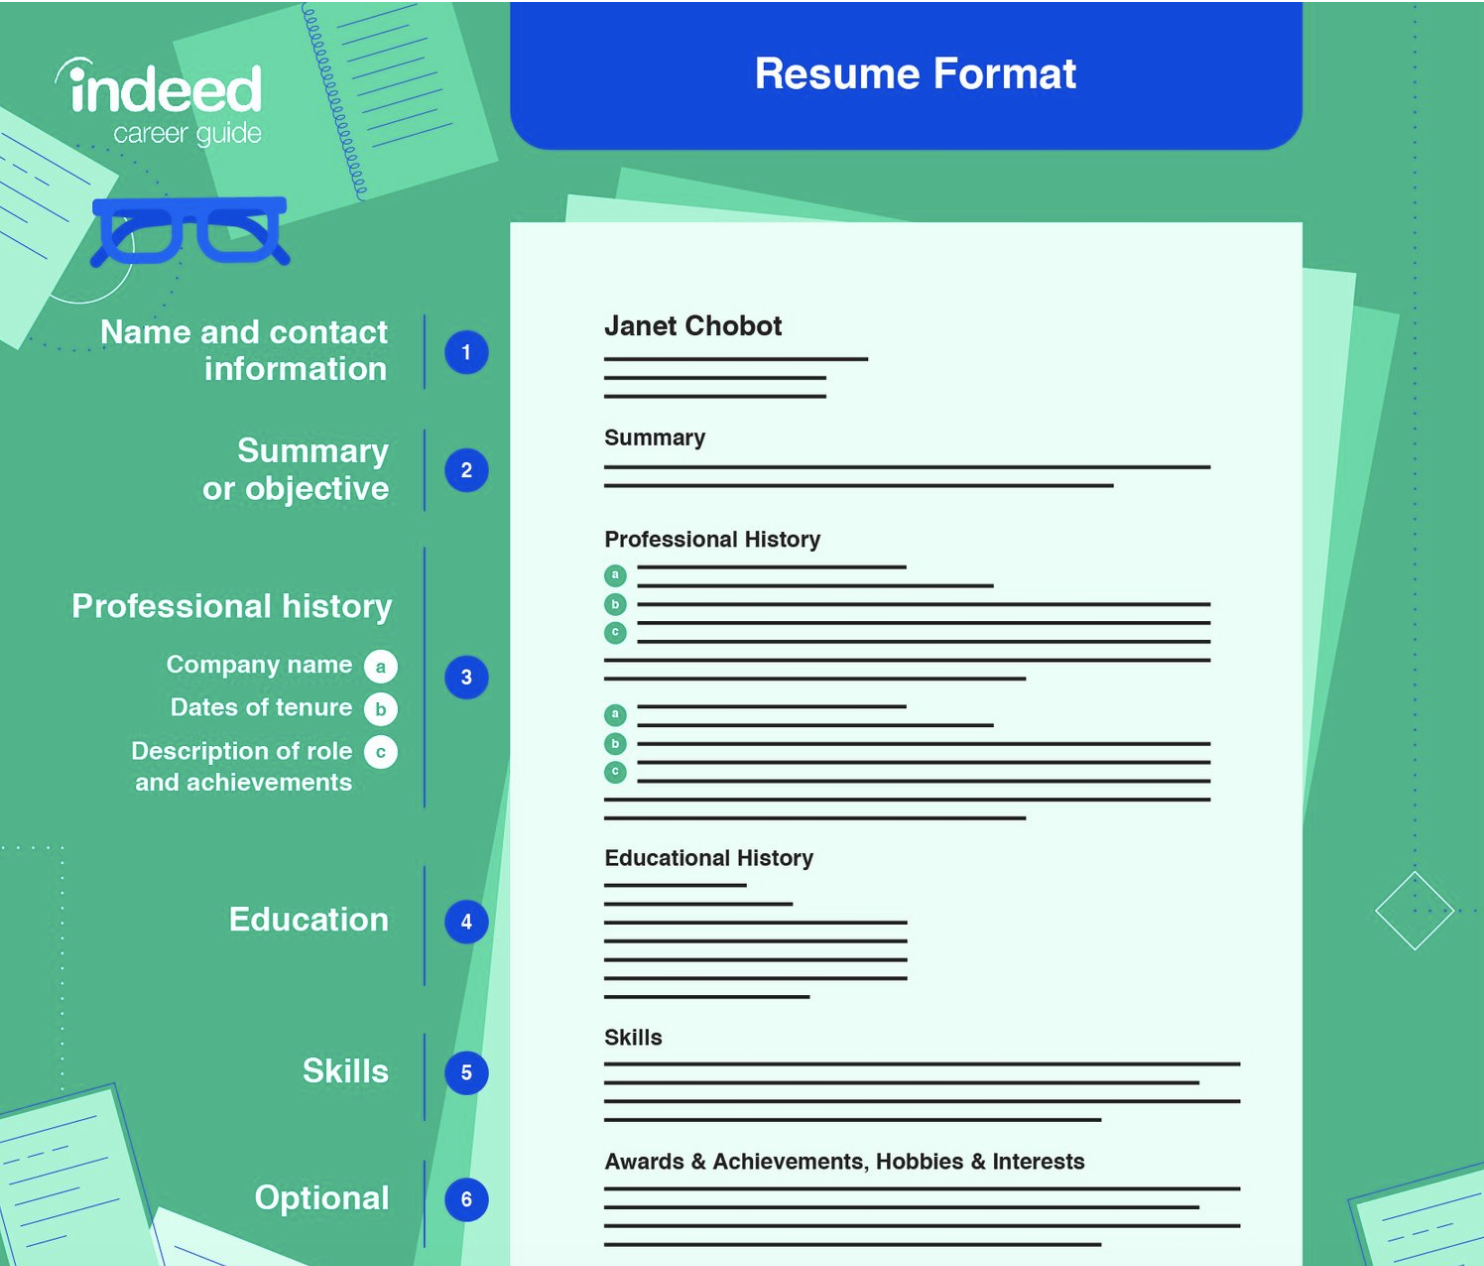 Résumé template with sections including summary, professional history, education, skills, and awards